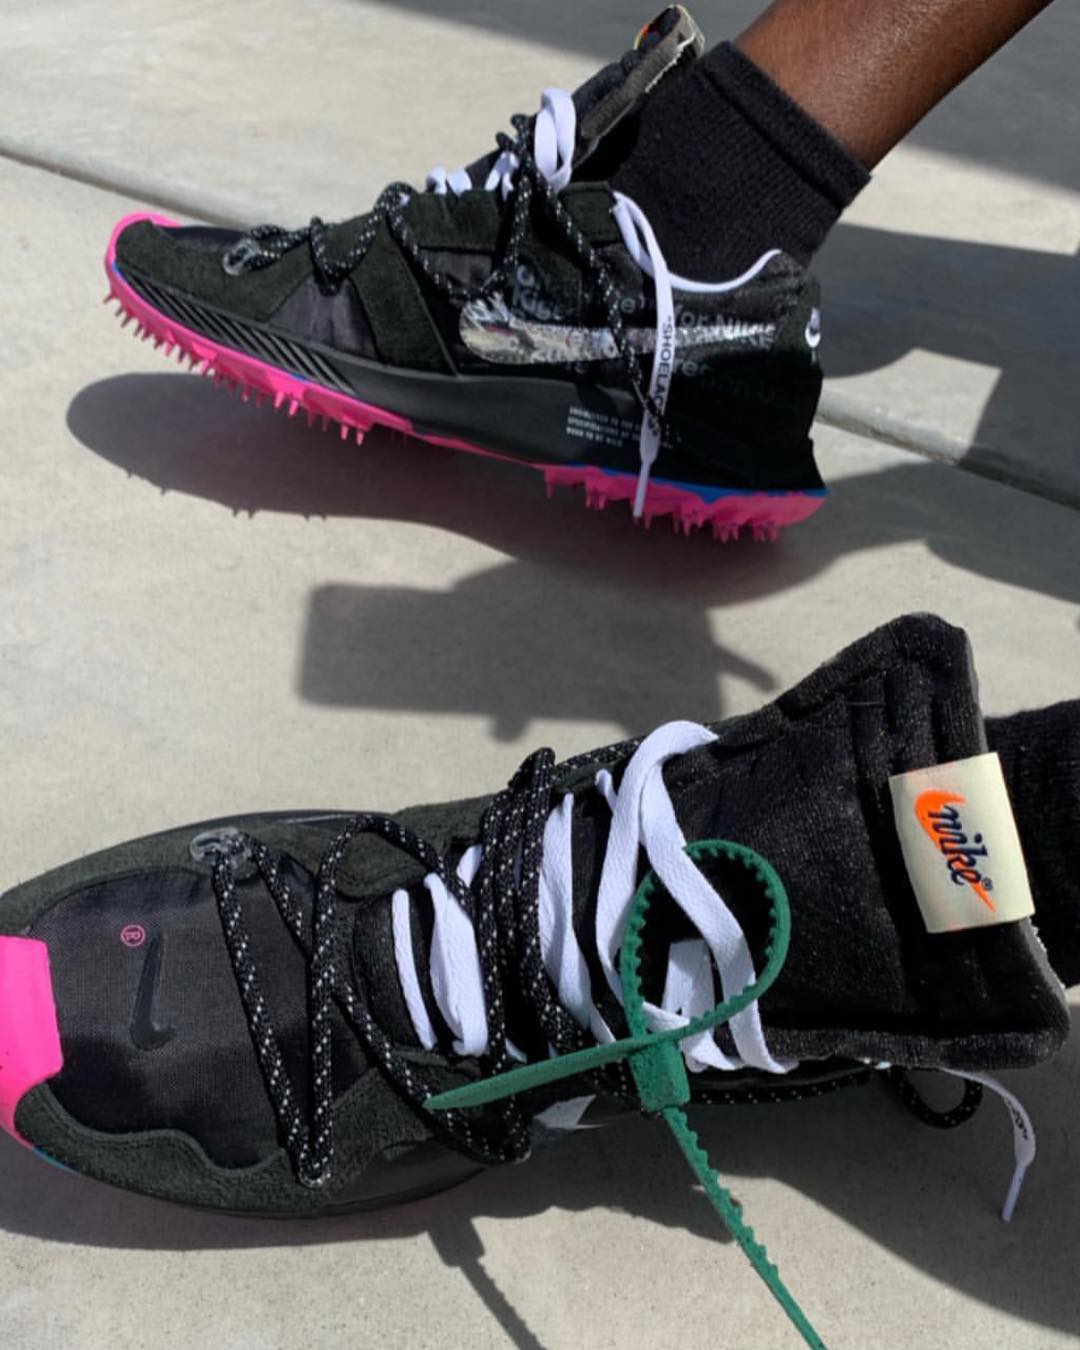 Virgil Abloh Teases New Off-White x Nike Collab At Coachella